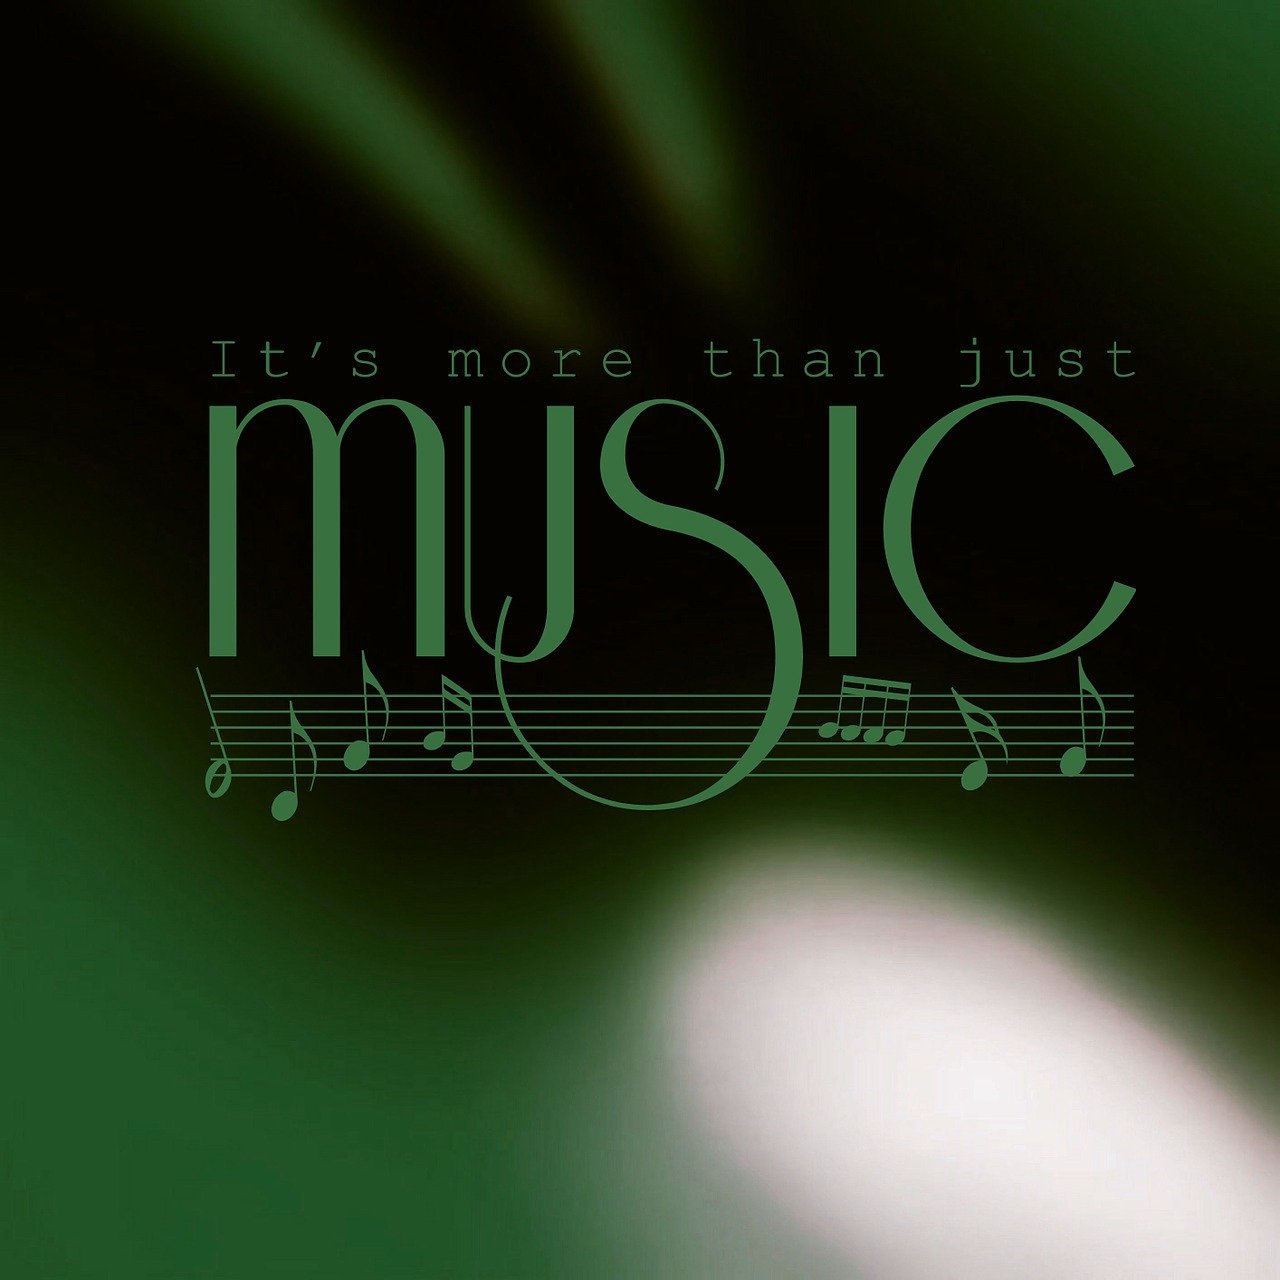 The words "It's more than just music" with a music staff and 7 notes in light green, centered within a darker green square. An oval-shaped white light shines in the bottom right corner.